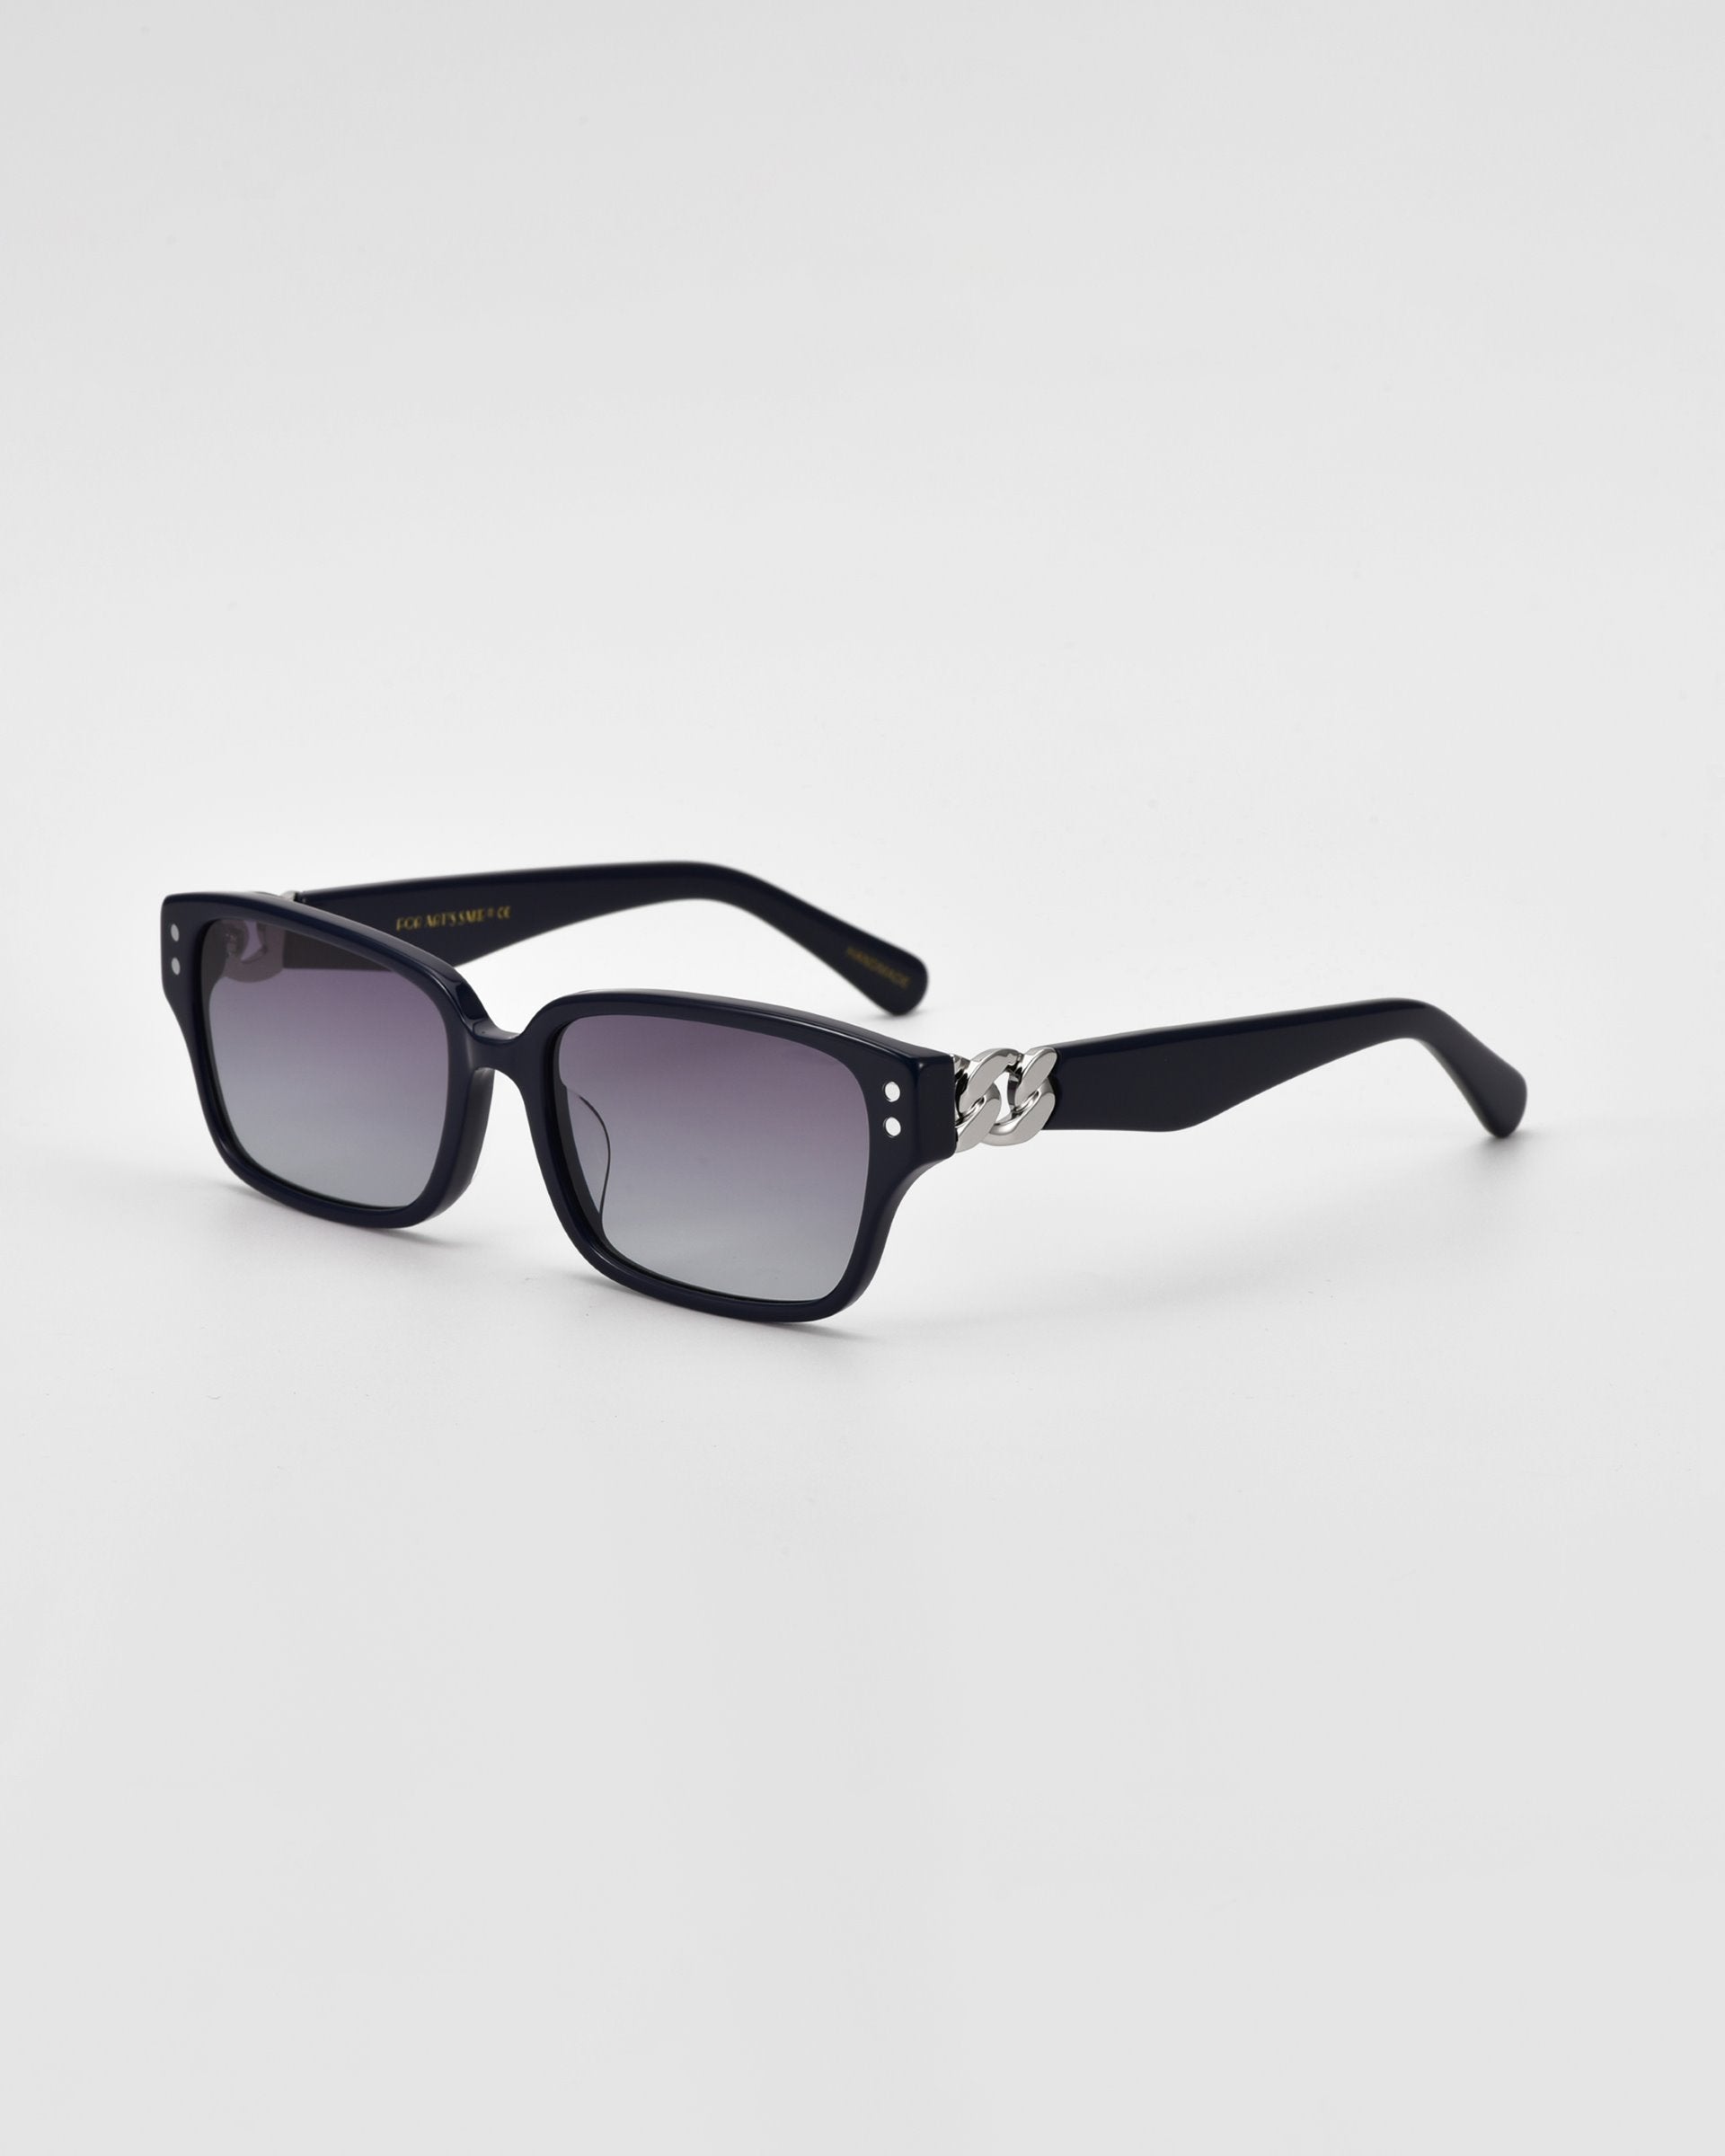 The For Art&#39;s Sake® Zenith sunglasses are a pair of black rectangular shades with dark-tinted lenses. Handcrafted from acetate, the frame features small decorative details near the hinges and chunky chain detailing on the arms. These stylish sunglasses are set against a plain white background.